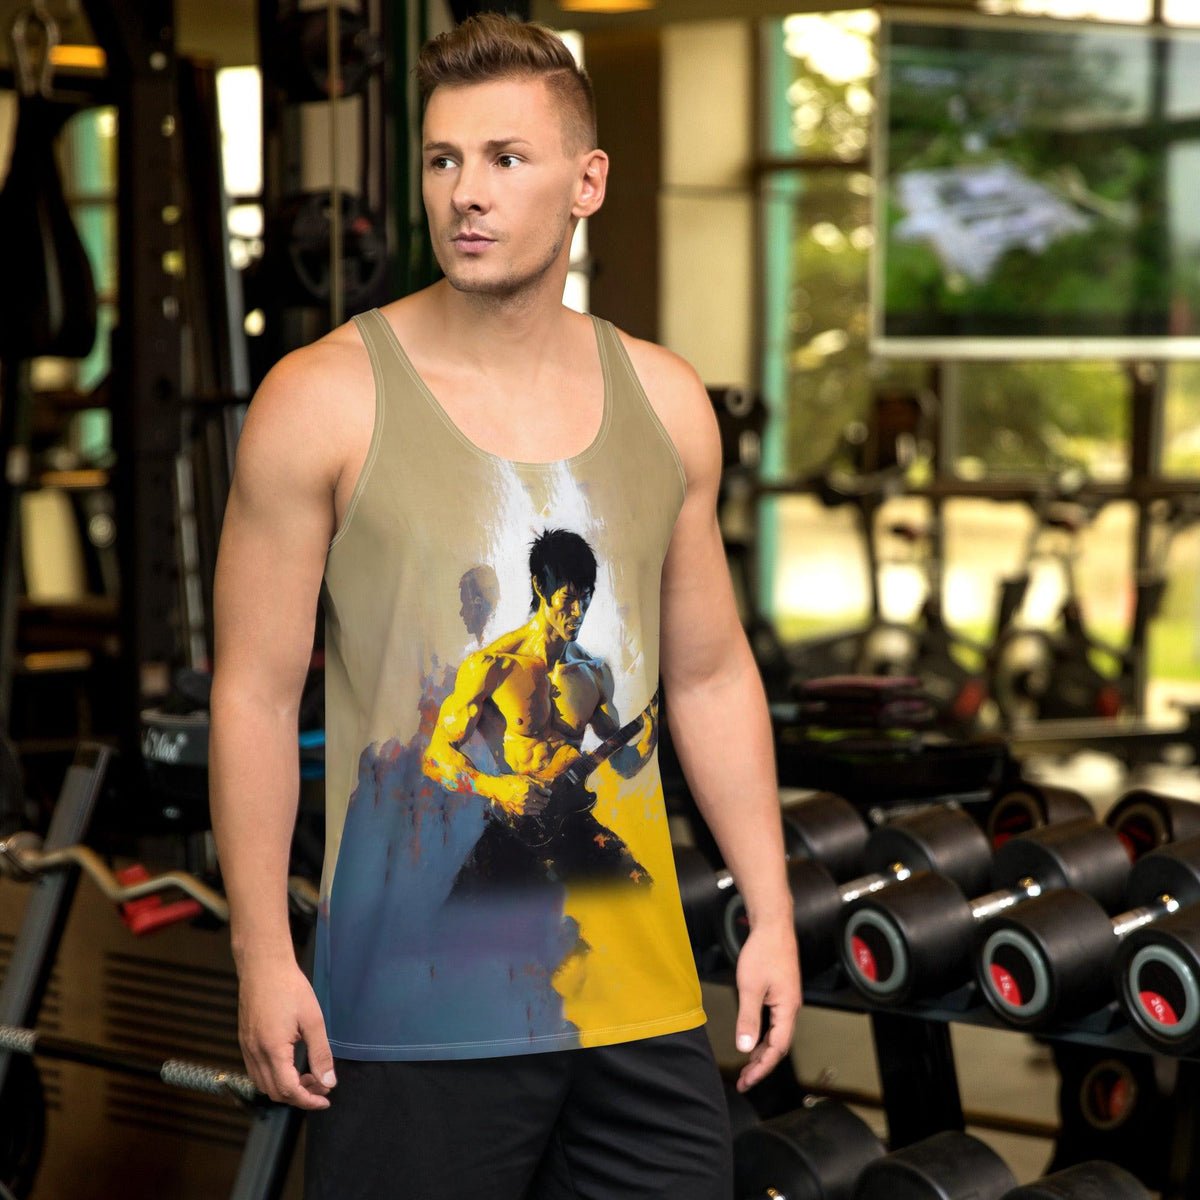 NS 825 Men's athletic tank top front view.